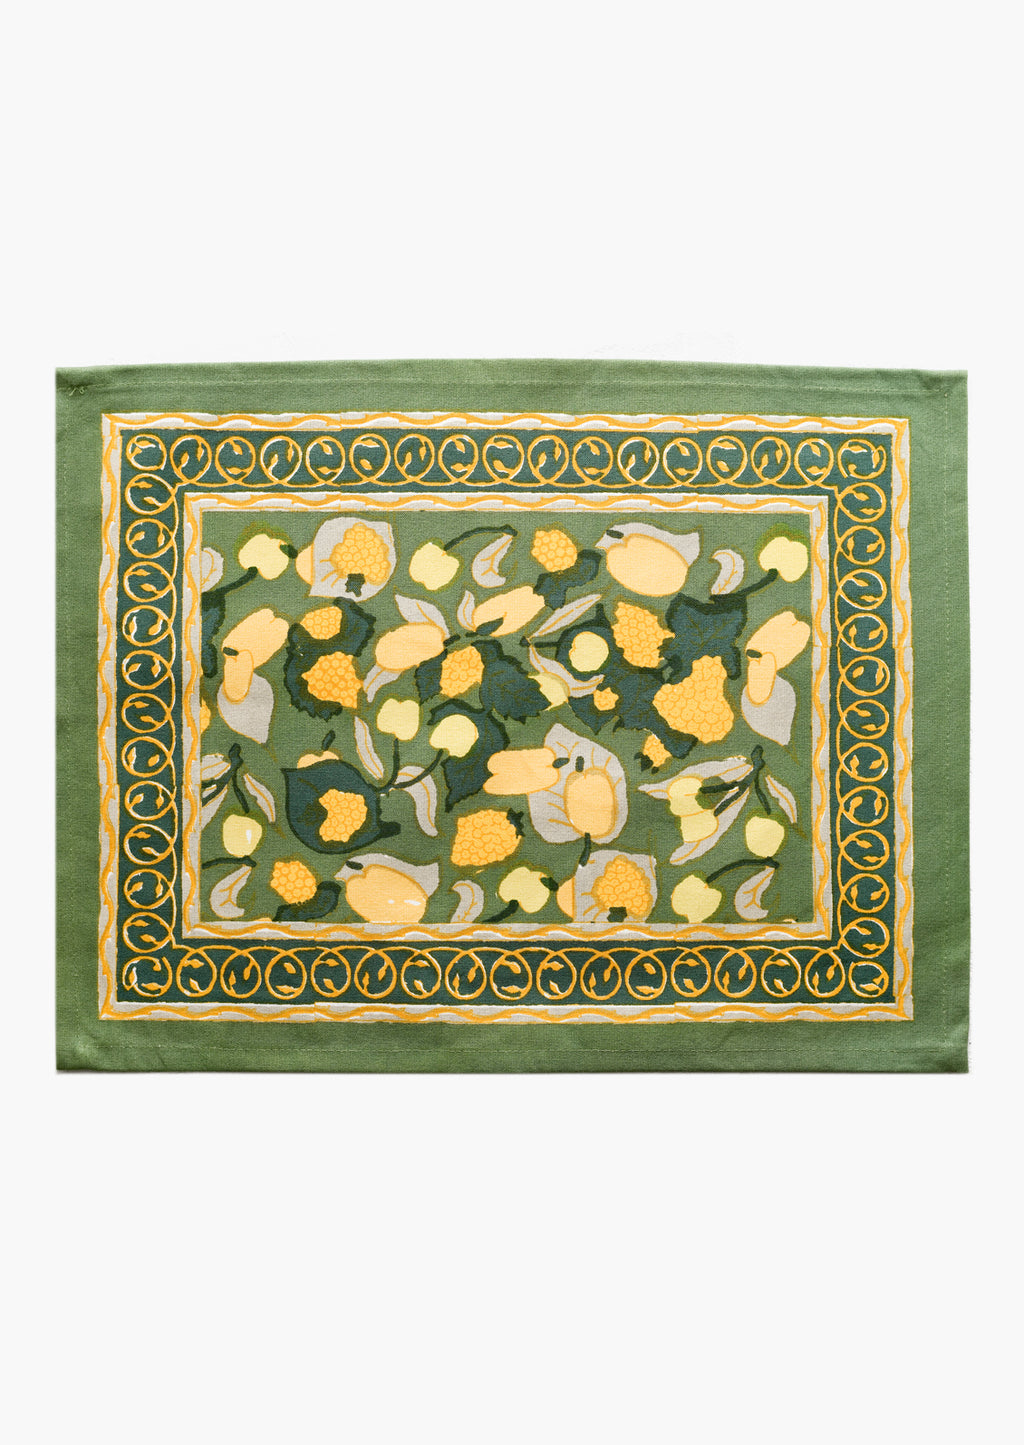 2: A block printed placemat in green and yellow fruit print.